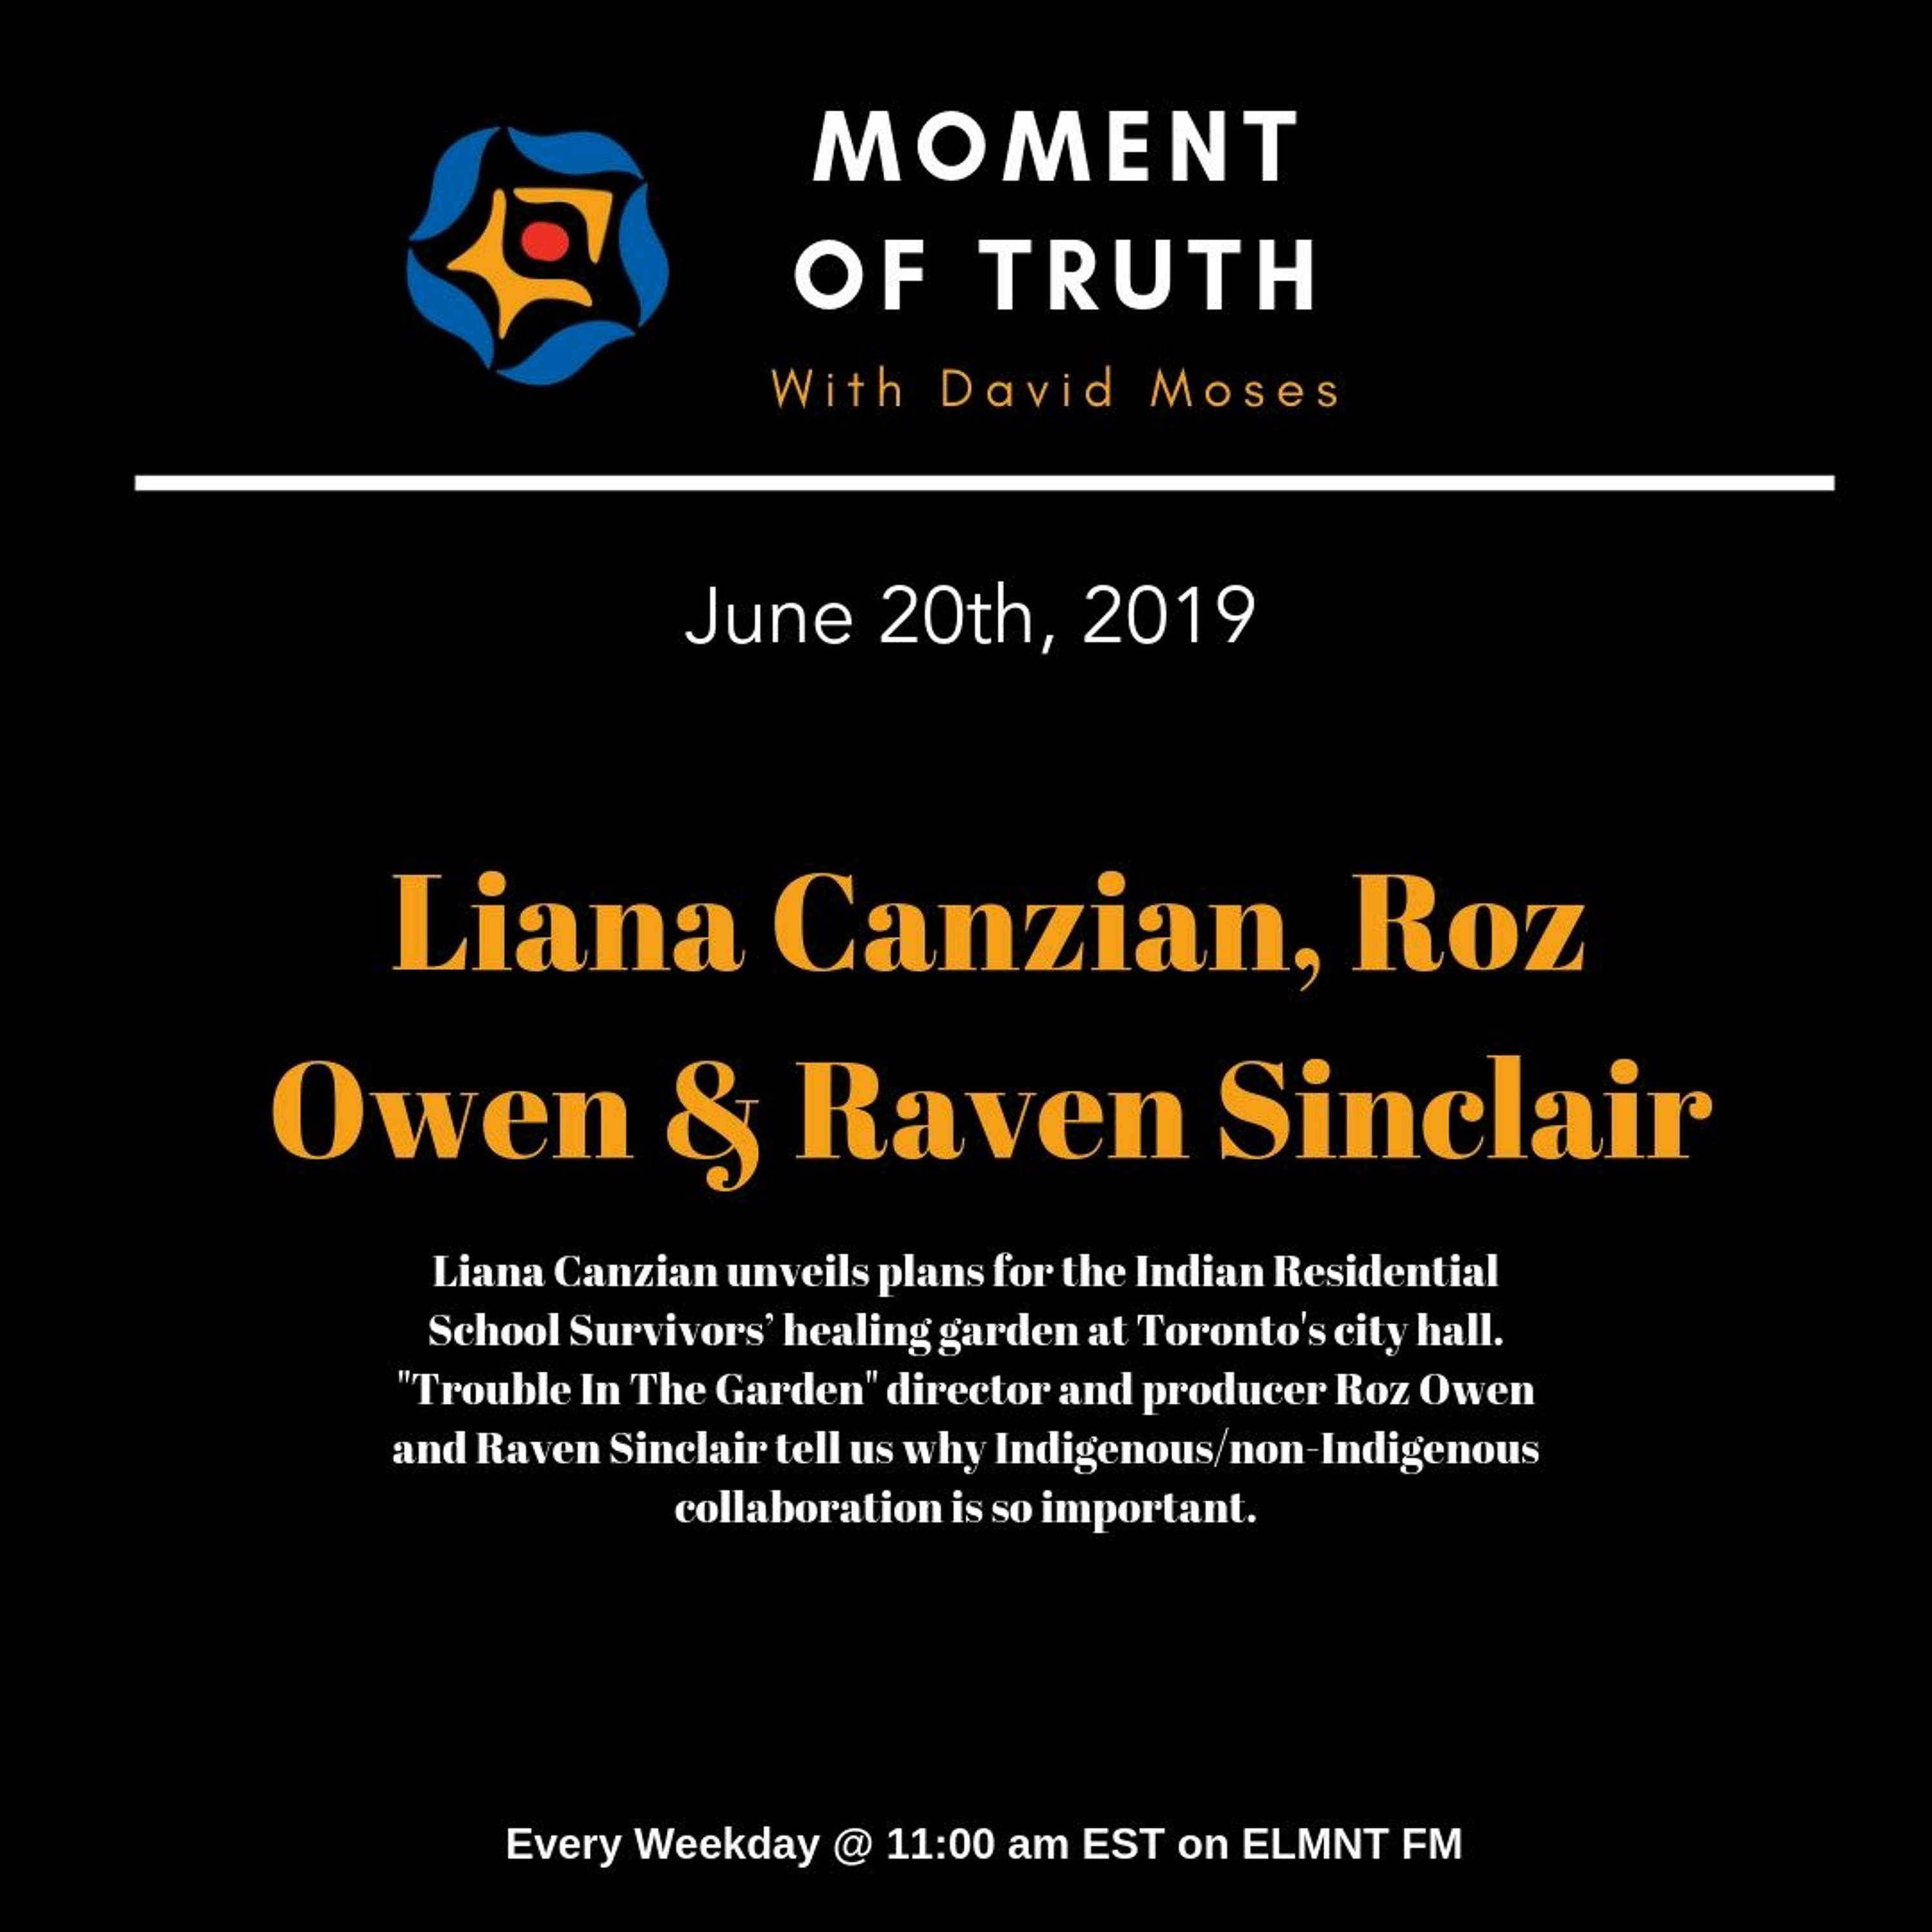 MOMENT OF TRUTH - Liana Canzian, Roz Owen & Raven Sinclair (June 20th, 2019)